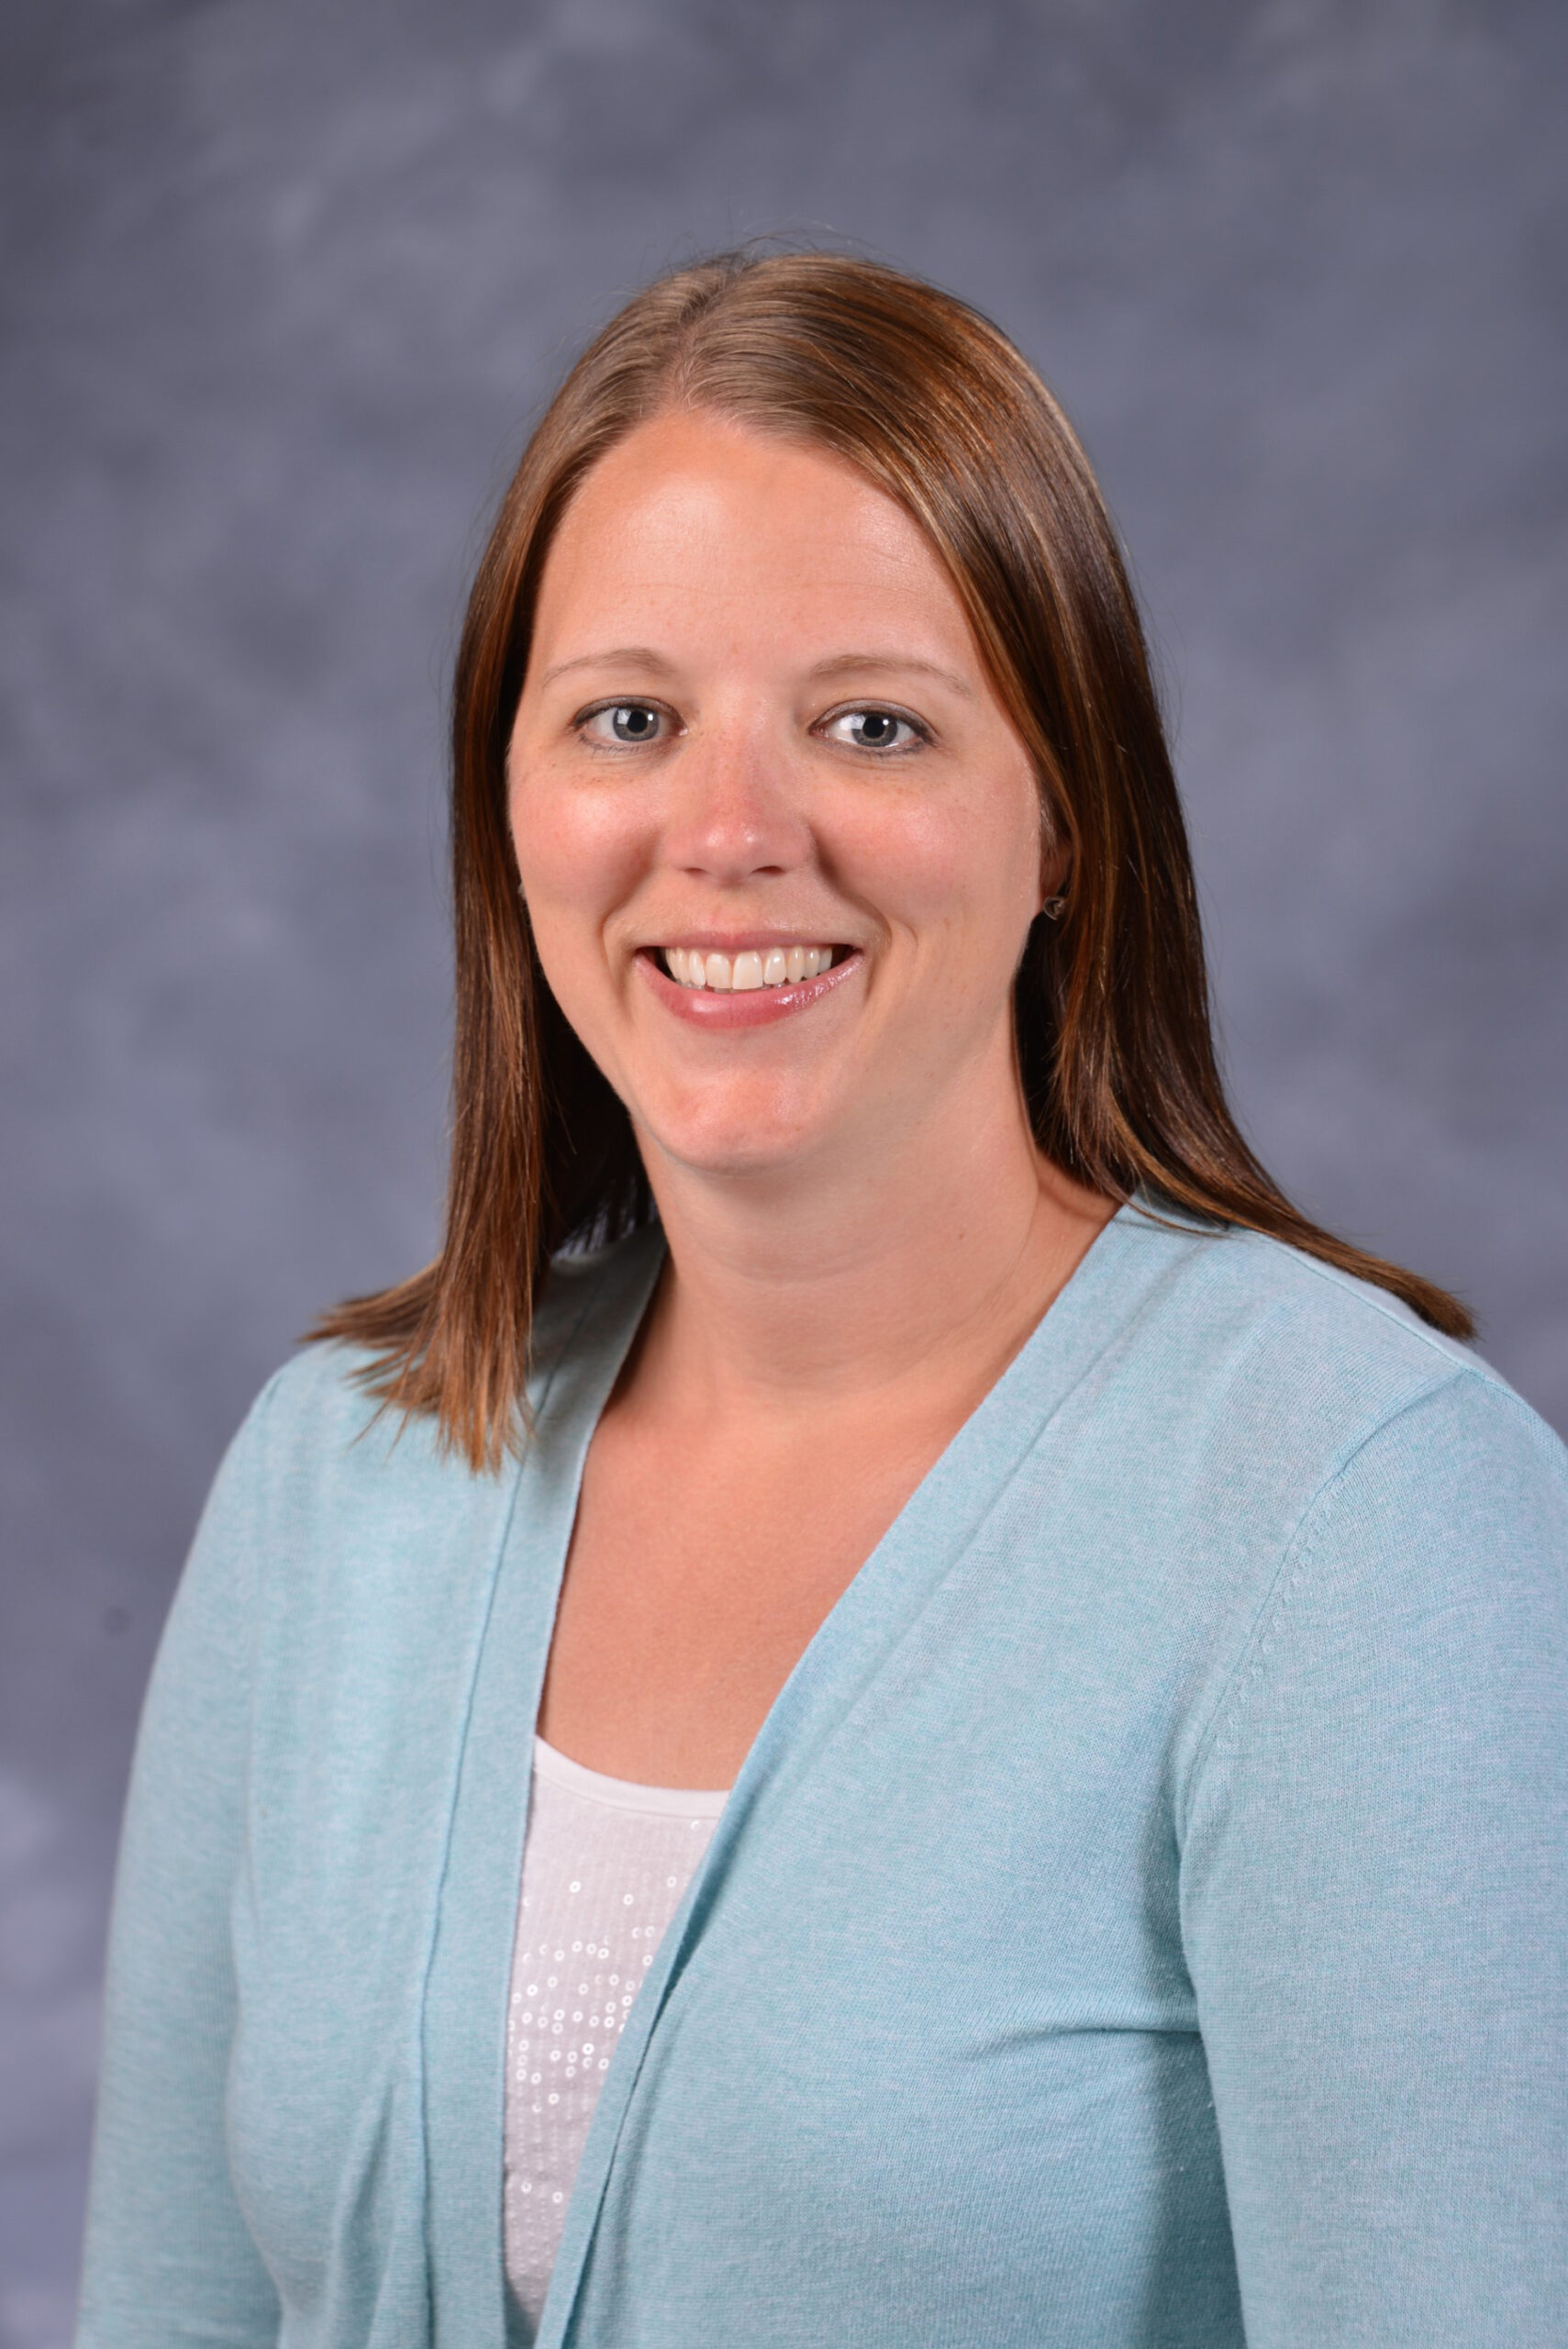 Wendy White - Physical Therapy-Pediatric provider at Pediatric Therapy Services